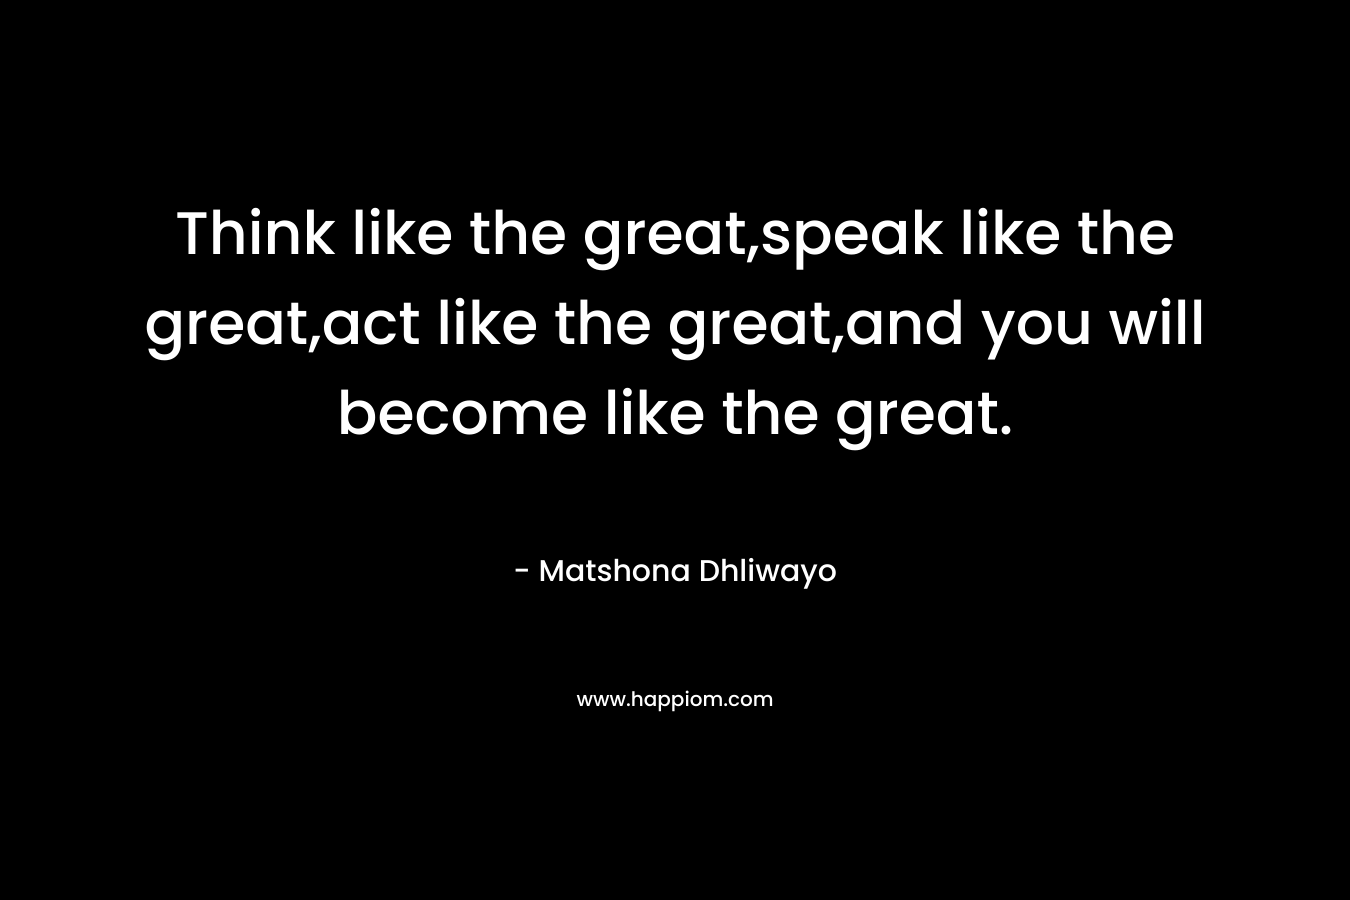 Think like the great,speak like the great,act like the great,and you will become like the great.